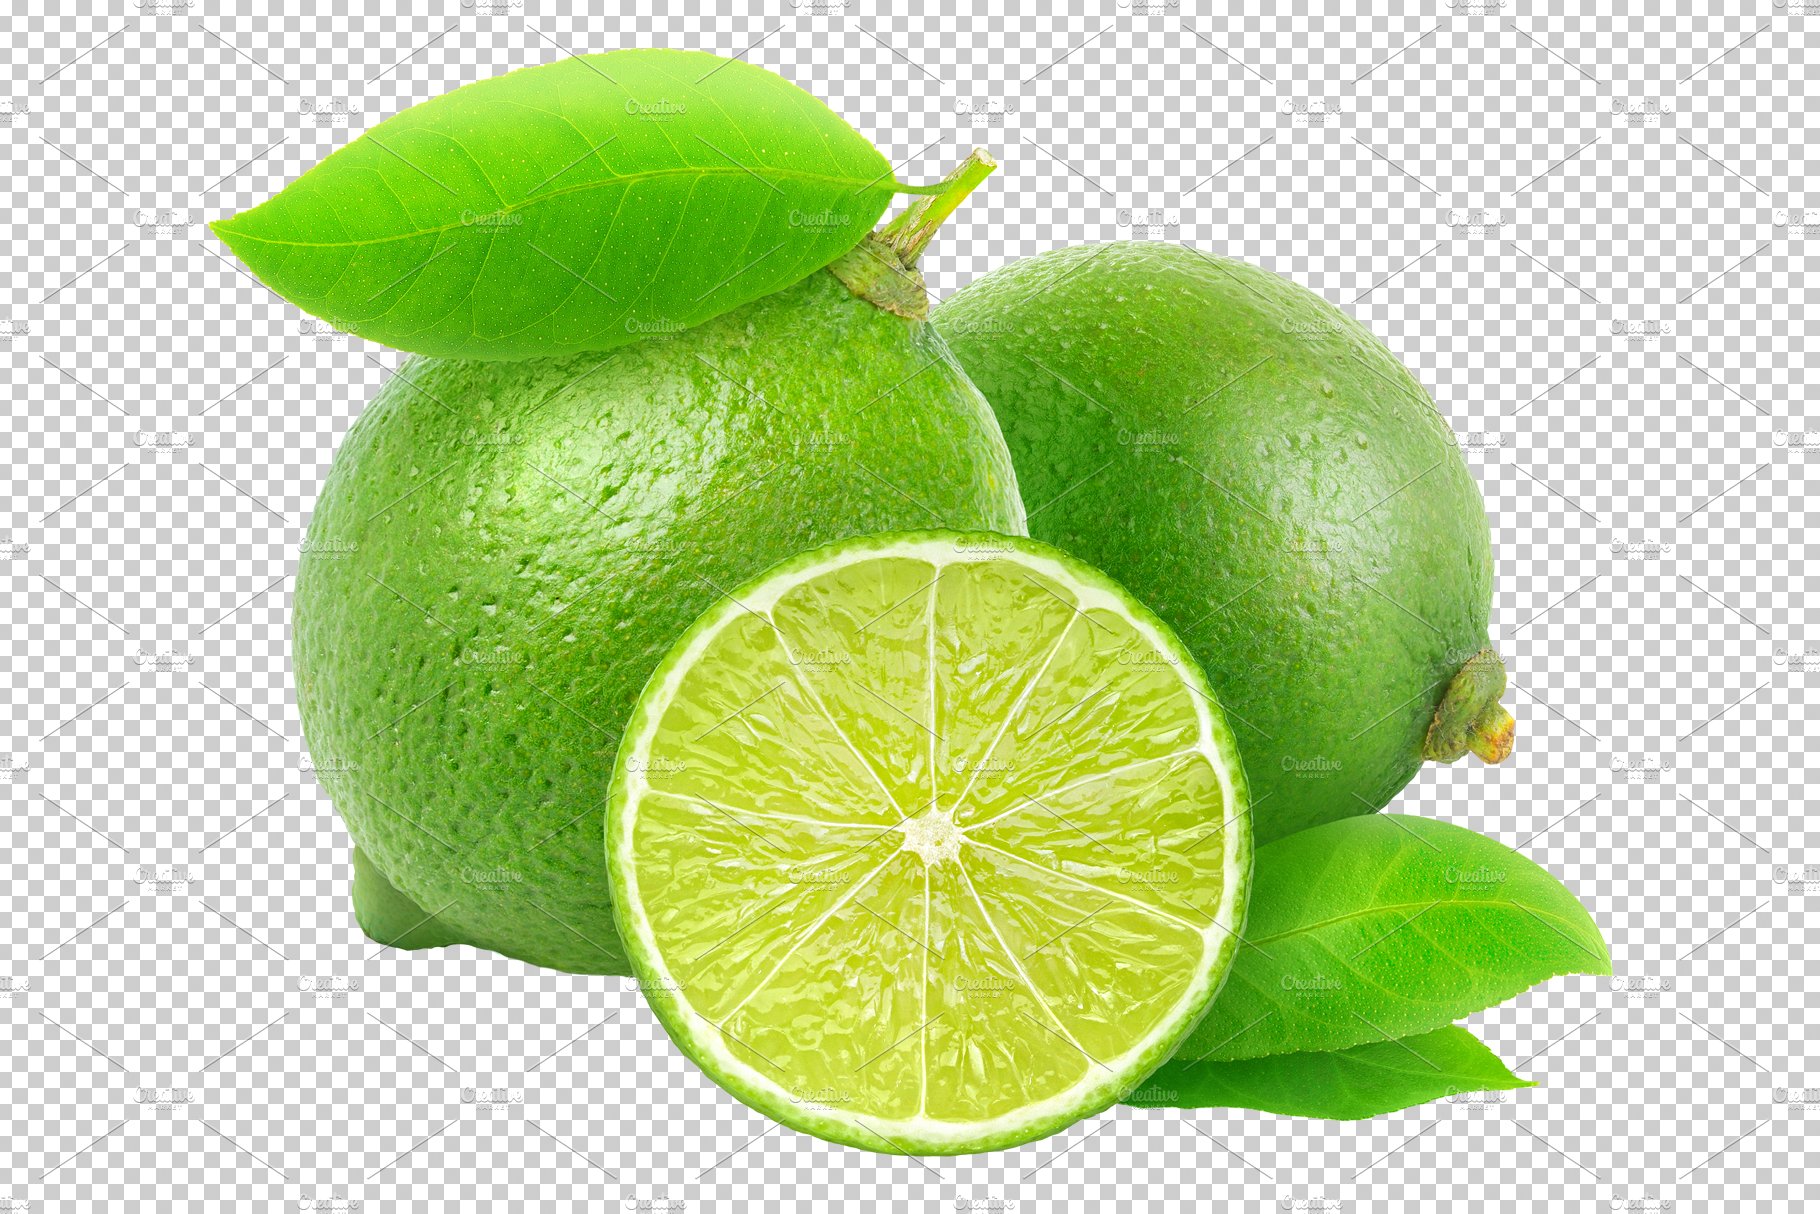 Cut limes preview image.